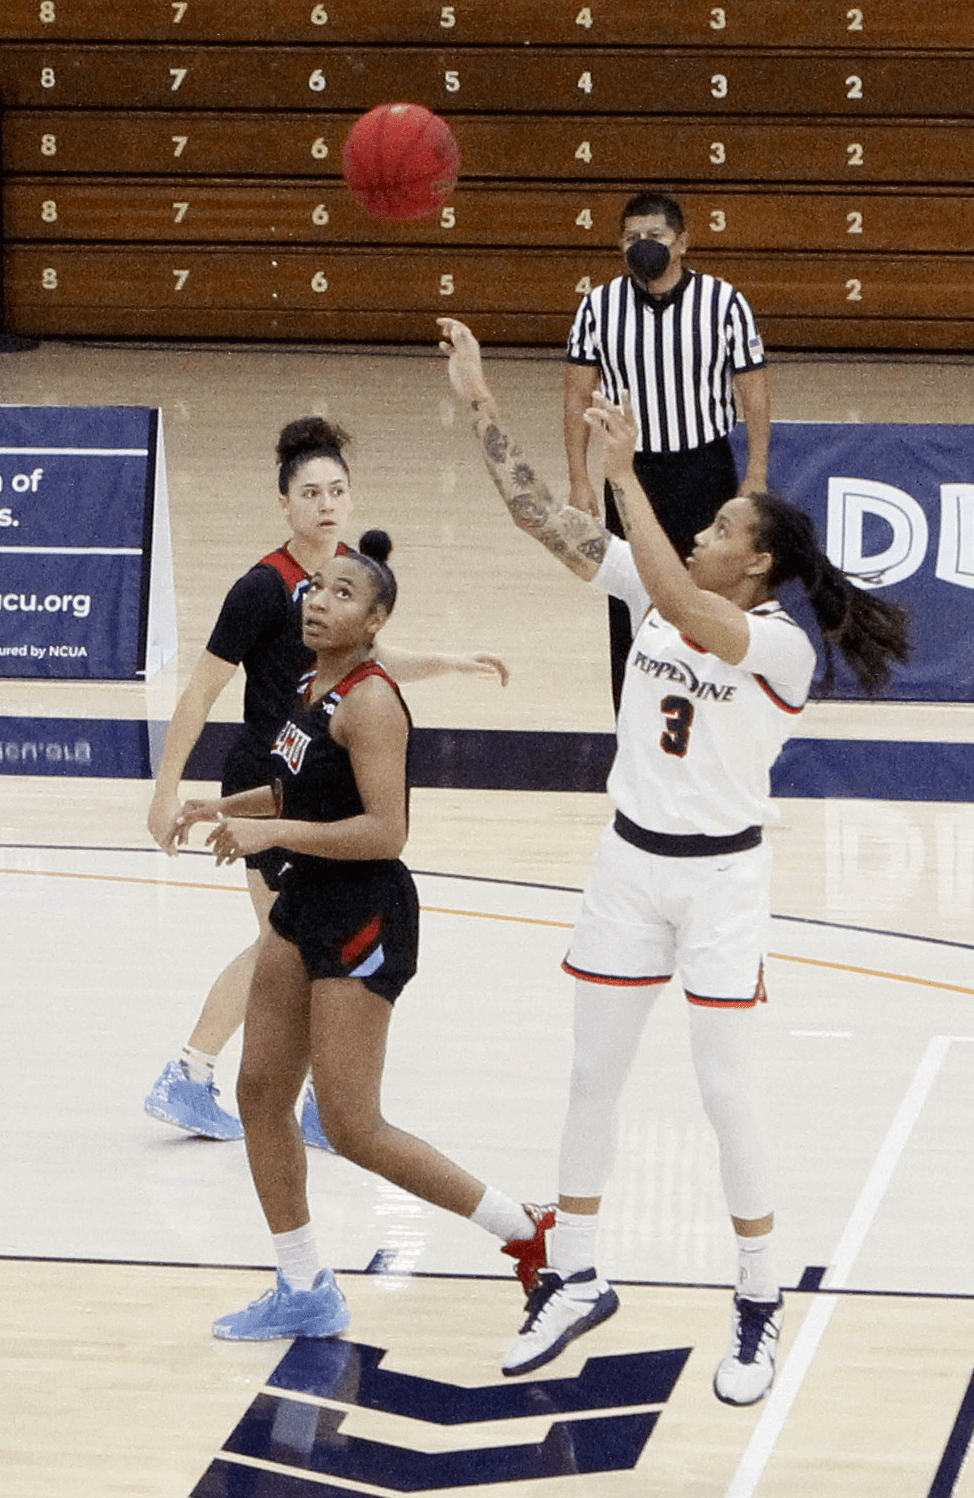 Redshirt sophomore guard Jayda Ruffus-Milner pulls up from midrange during Saturday's game against LMU. The Waves shot 37% from the field and crucially out-rebounded the Lions 45-30.